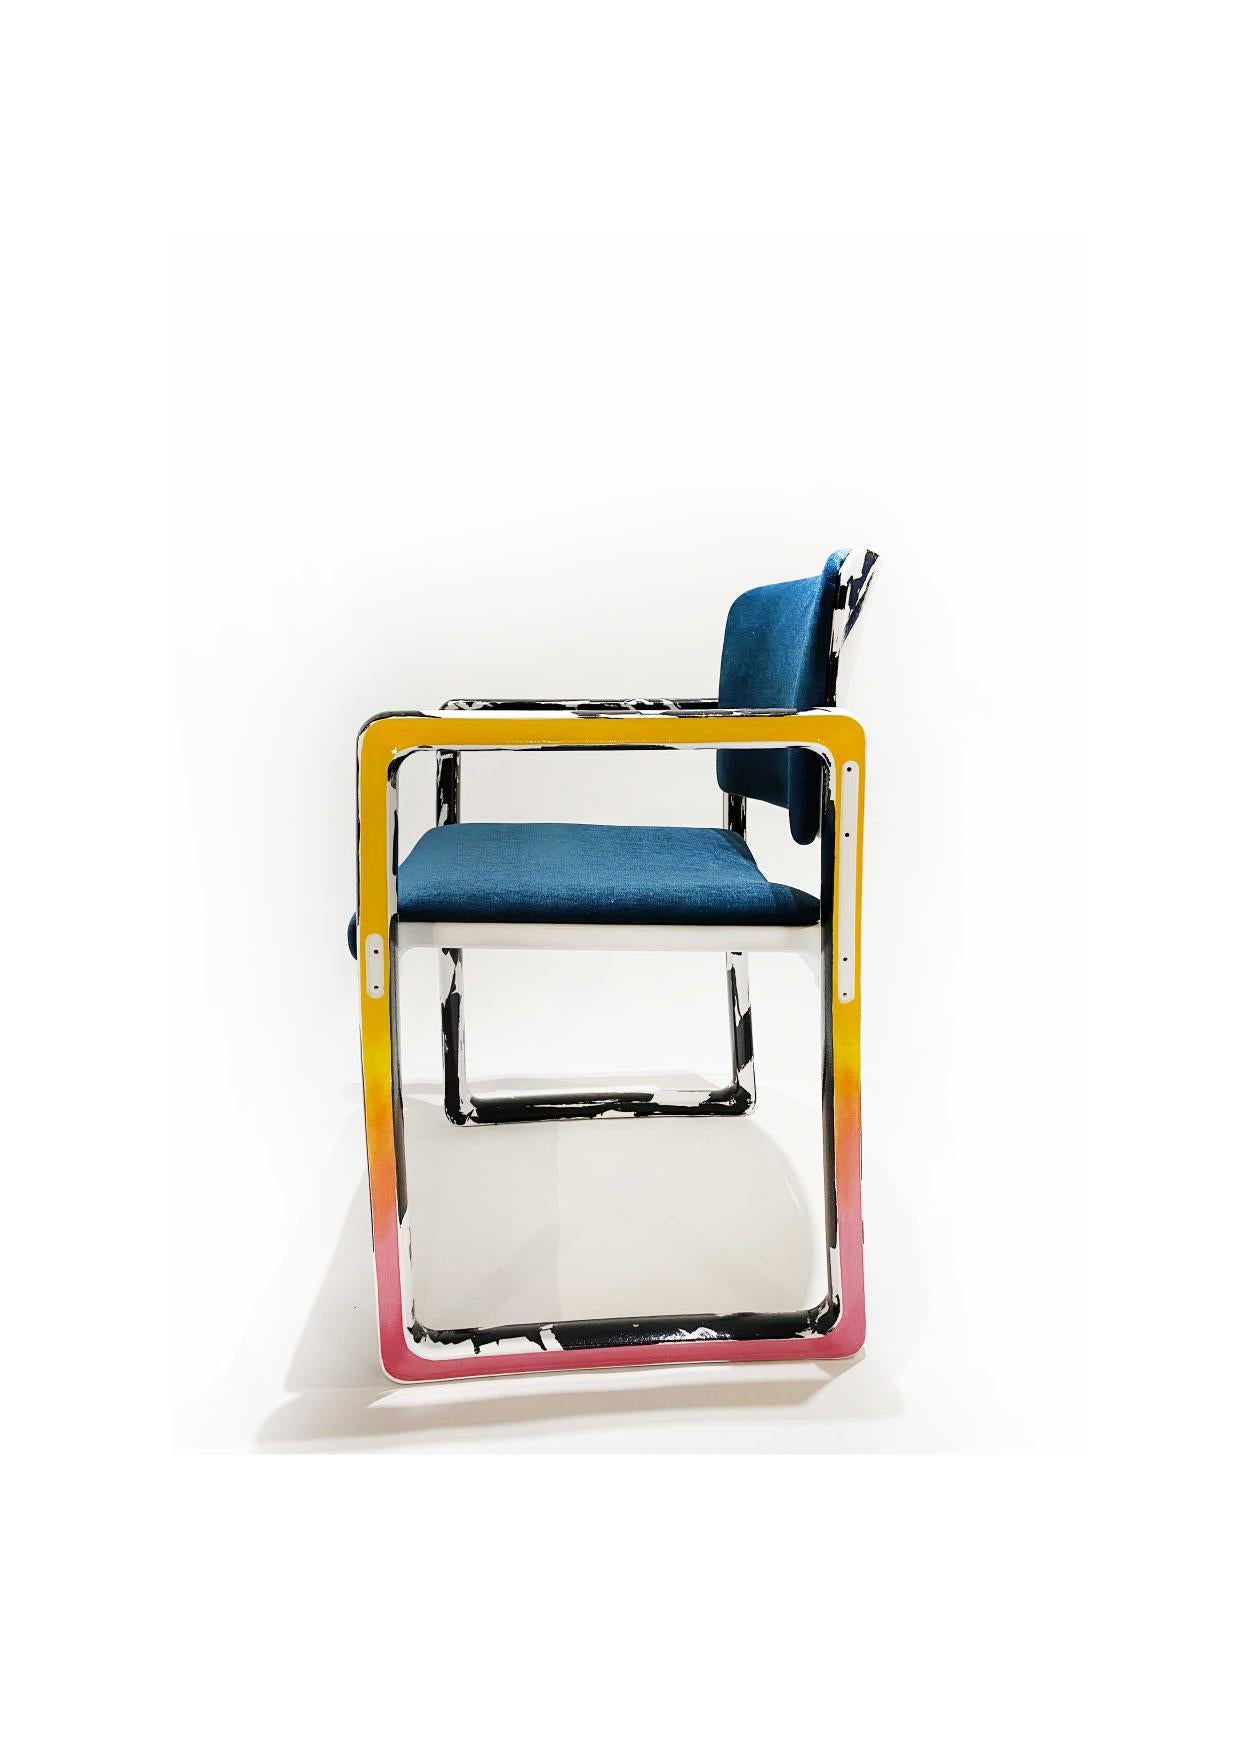 Origin 9 armchair by POLCHA
Dimensions: W 81 x D 58 x H 50 cm
Material: fabric: fiberglass and reupholstered in a fabric for Casal (100 prct PET & Aquaclean) / Work: Trompe l'Oeil Grand Antique and Degraded paint with white lacquer

After more